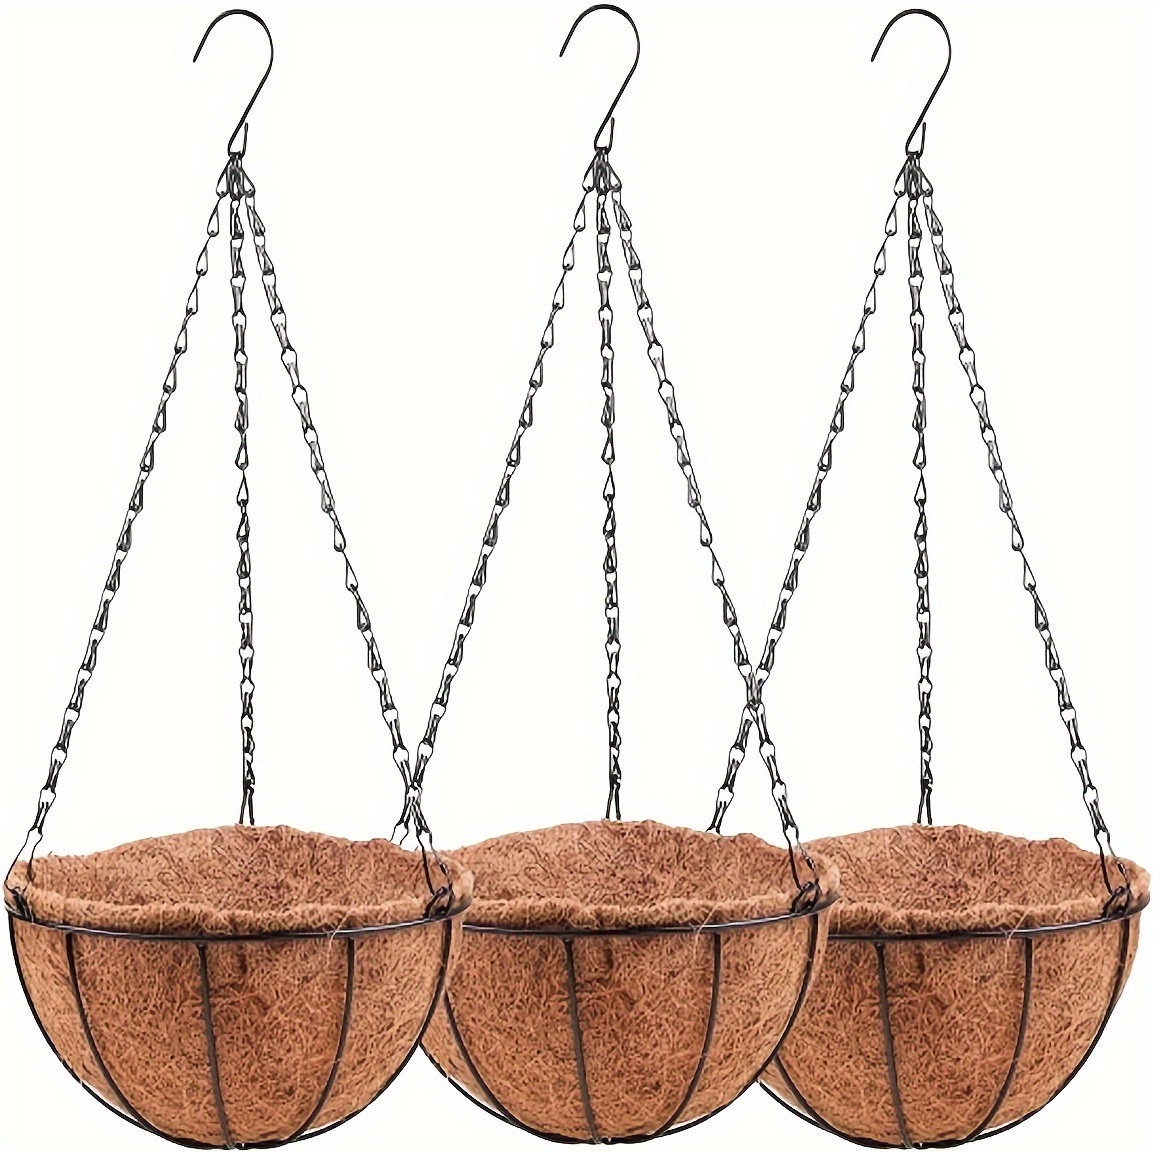 

3-piece 10in Metal Wire Hanging Planters With Coco Liners - Versatile Outdoor Flower Basket Pots For Patio, Porch, Garden & Balcony Decor